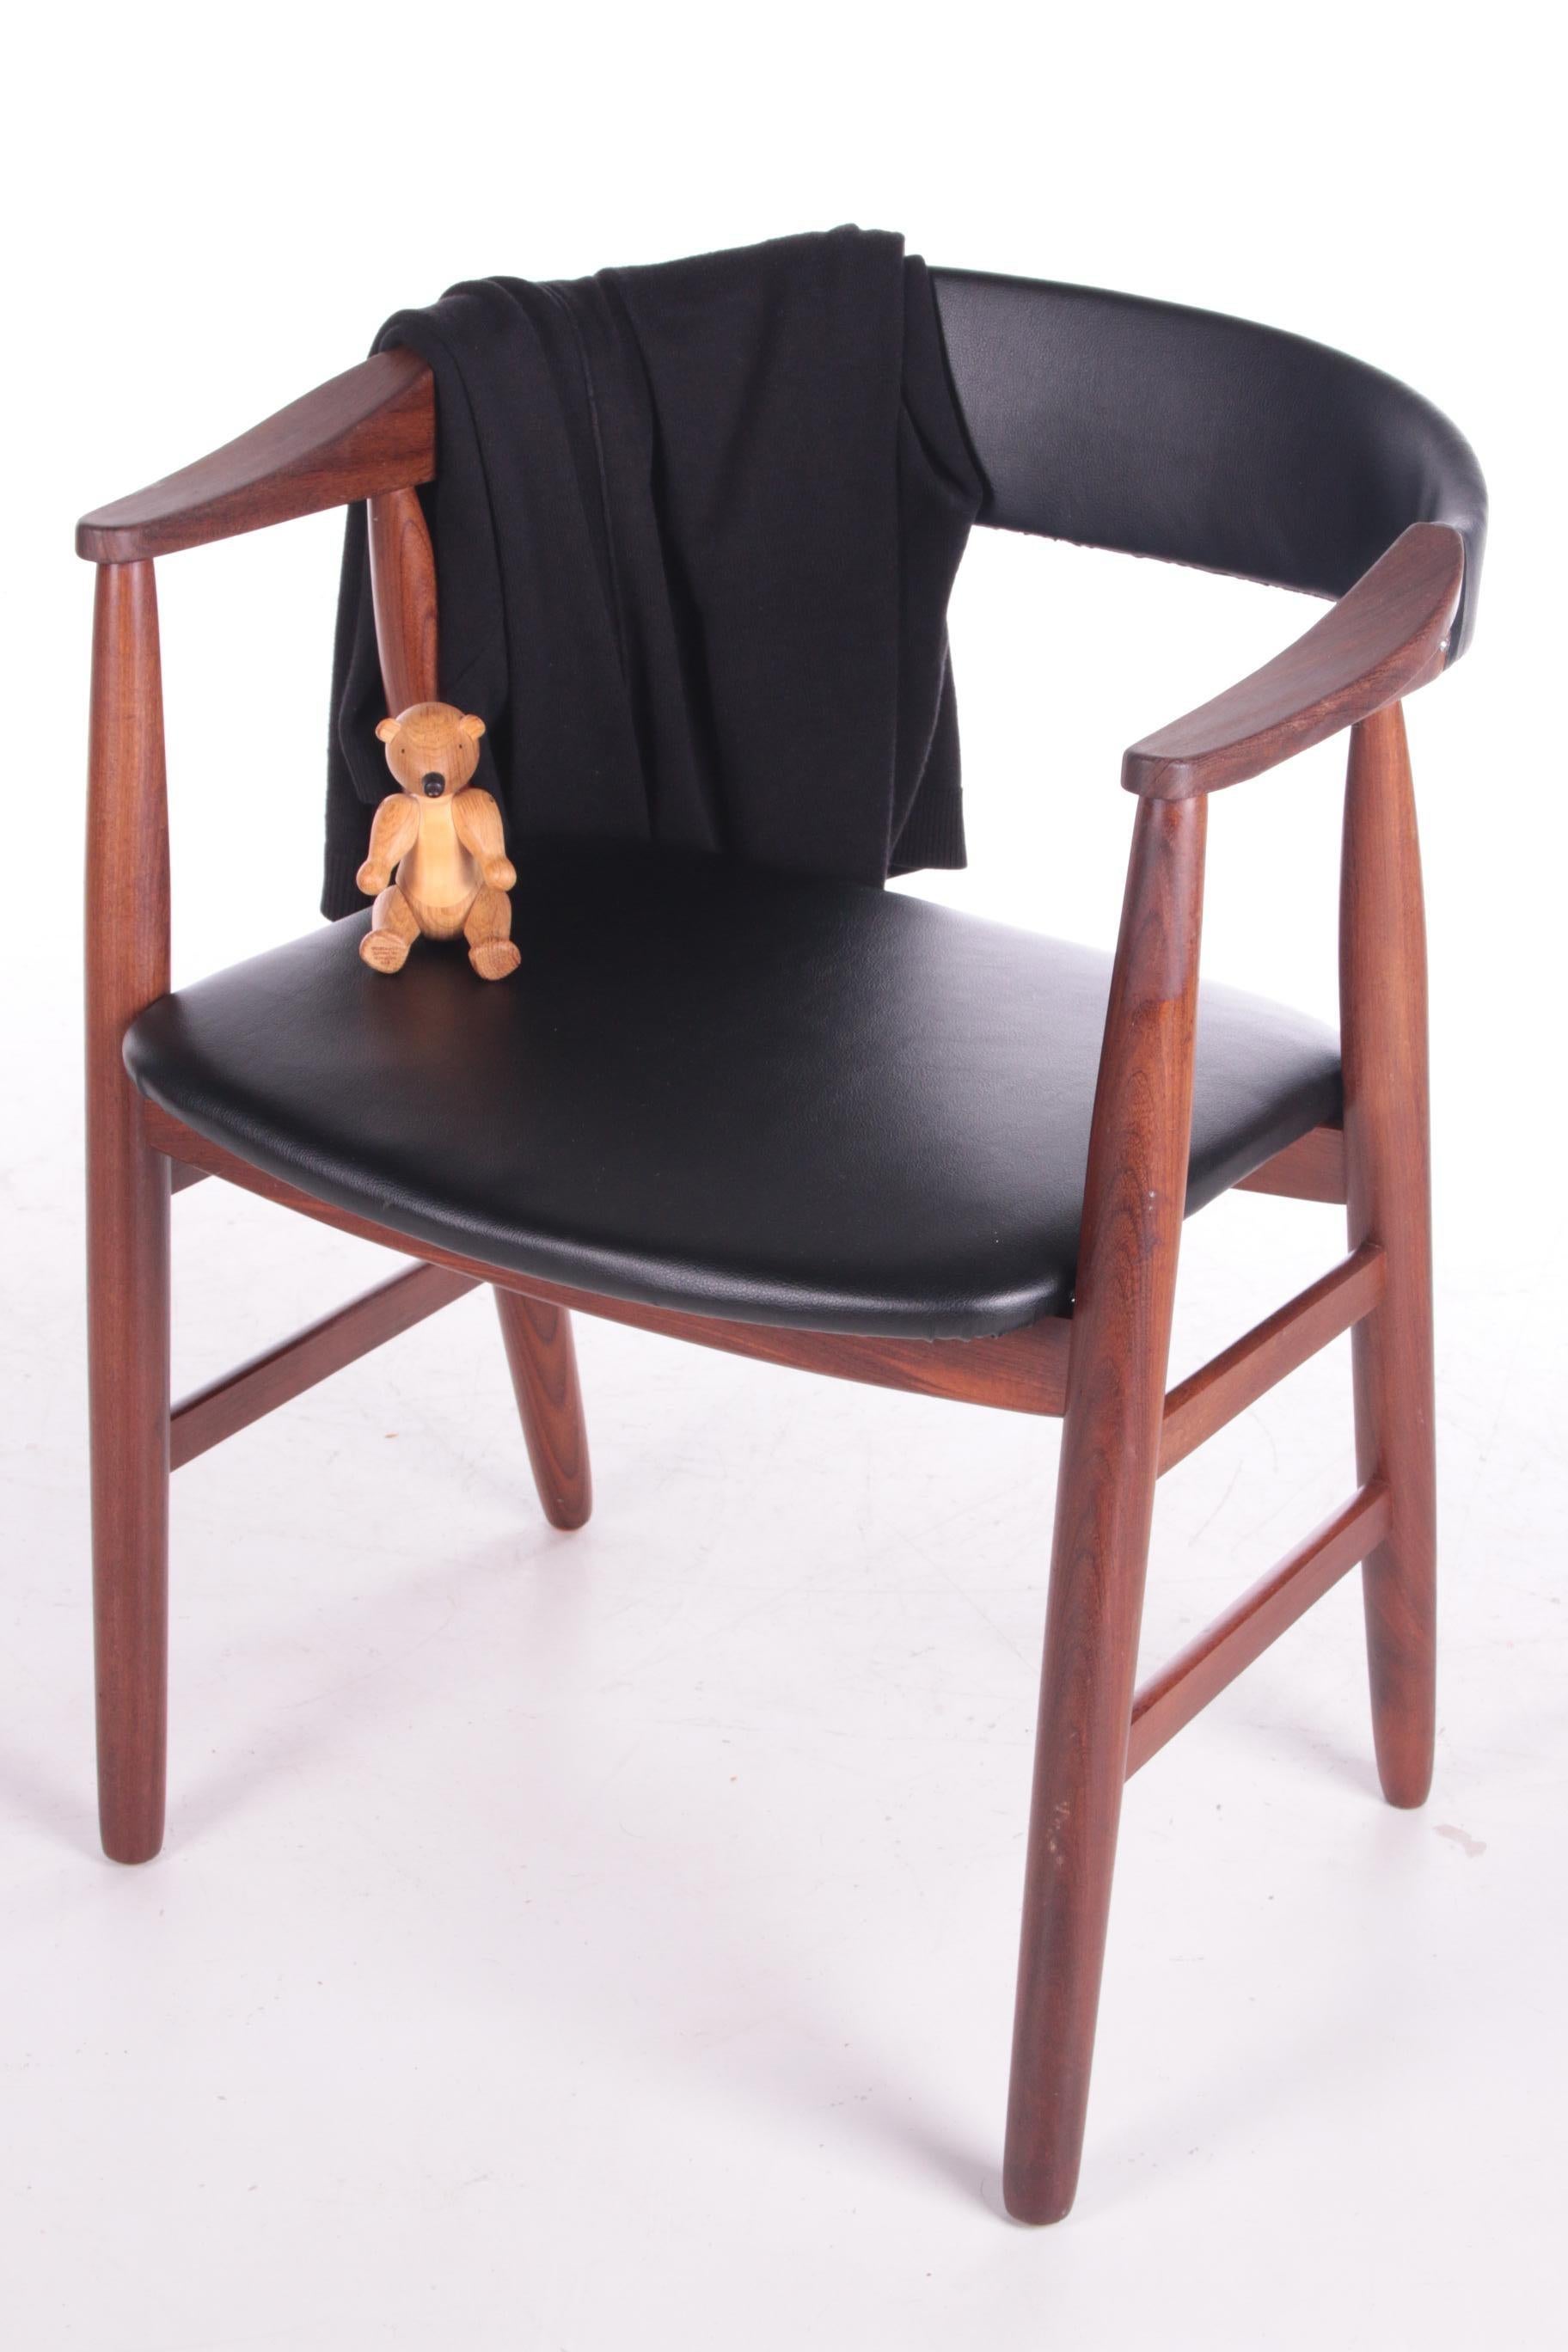 Vintage Danish design office chair from Farstrup, Denmark 1960.

Danish vintage design office chair from the Farstrup furniture factory. The chair comes from the sixties and is upholstered with black artificial leather (original). The condition is